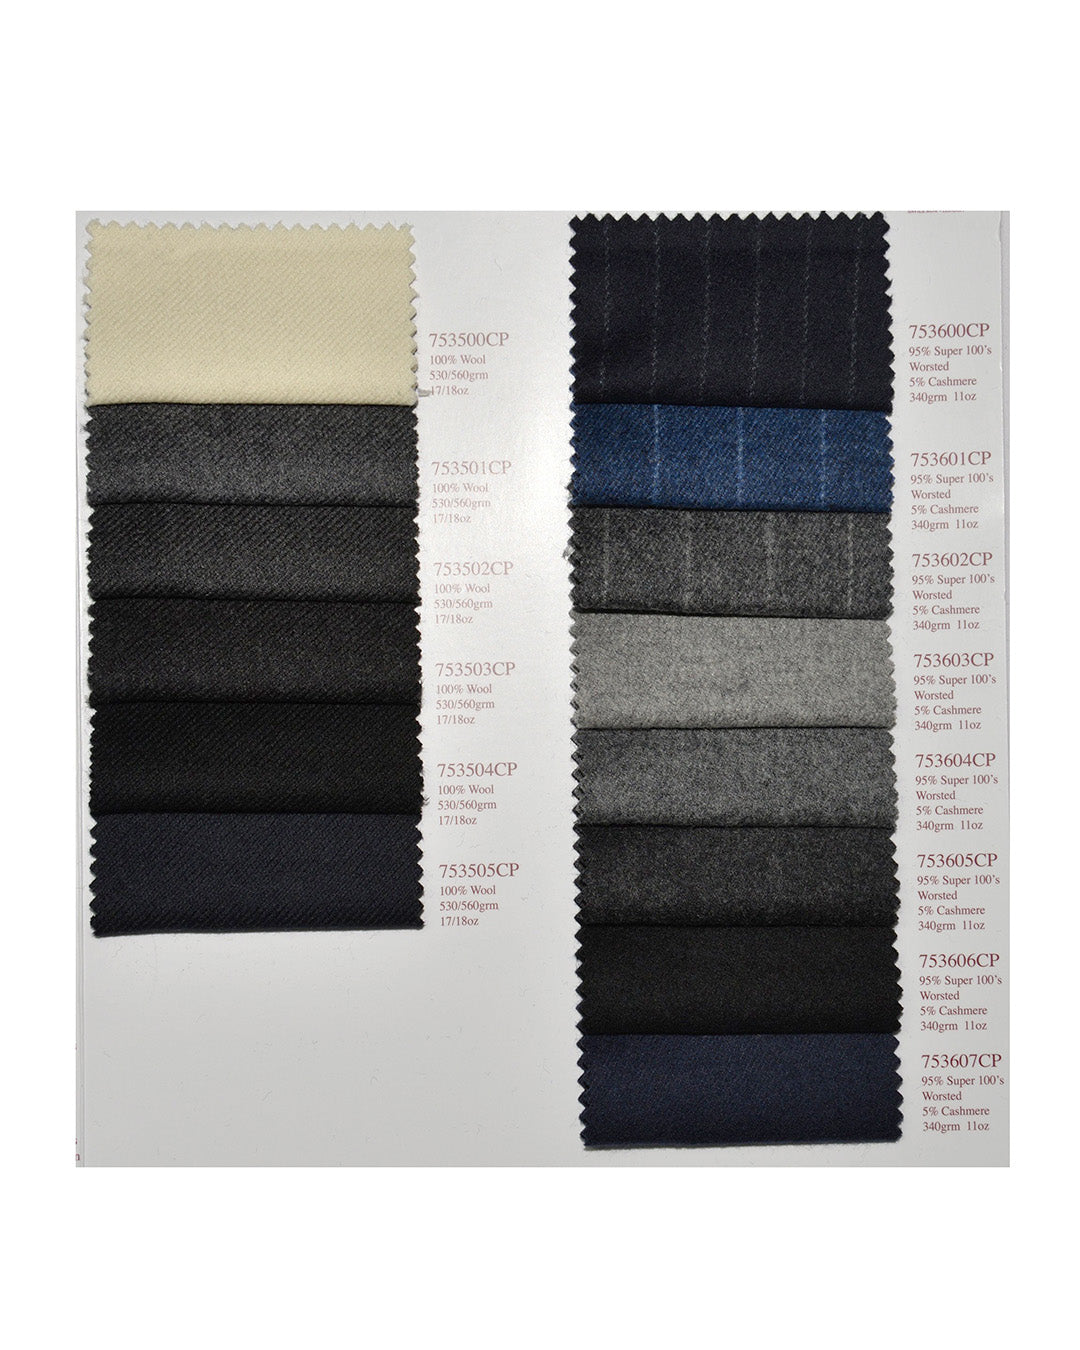 Holland Sherry Classic Worsted Flannel Blue Sprinkle Wth Black